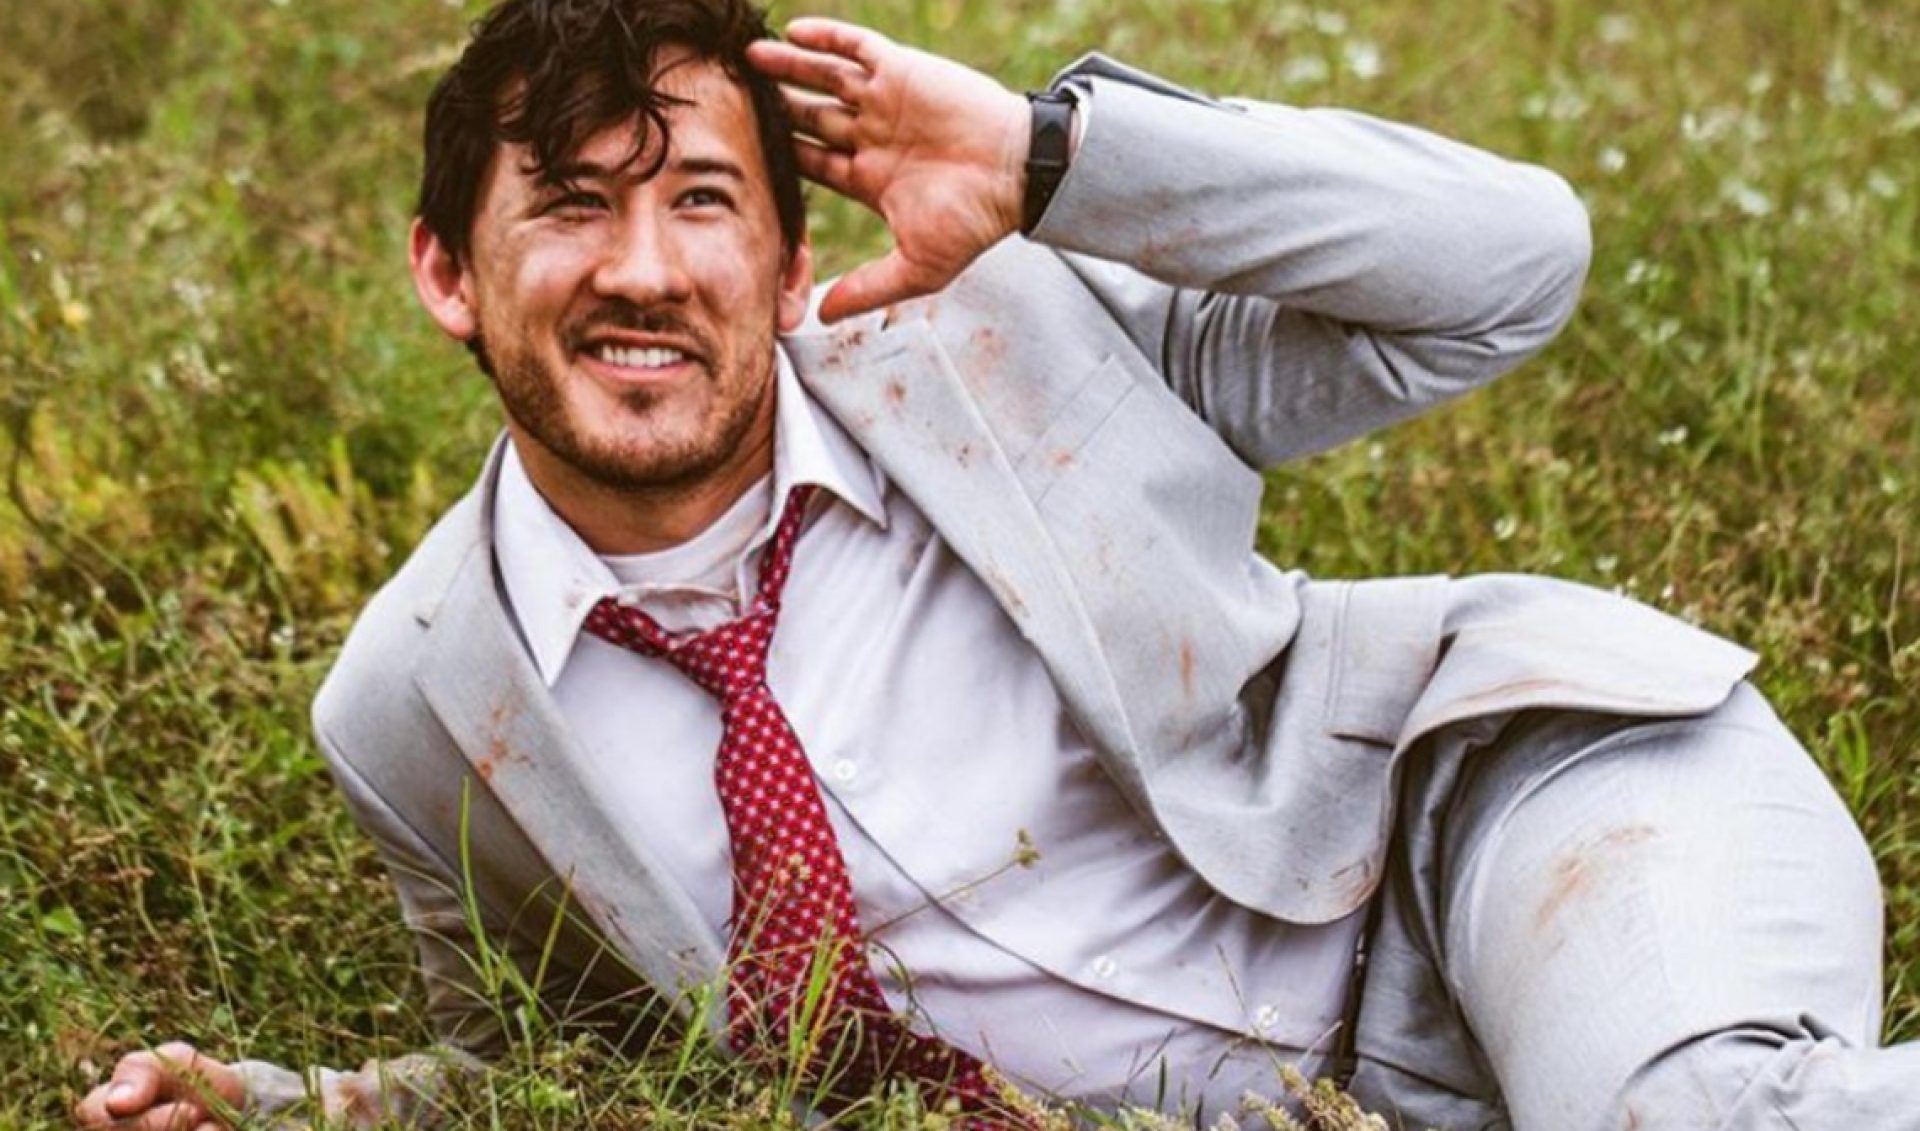 Markiplier Blasts Unauthorized Biography Being Sold Without His Consent